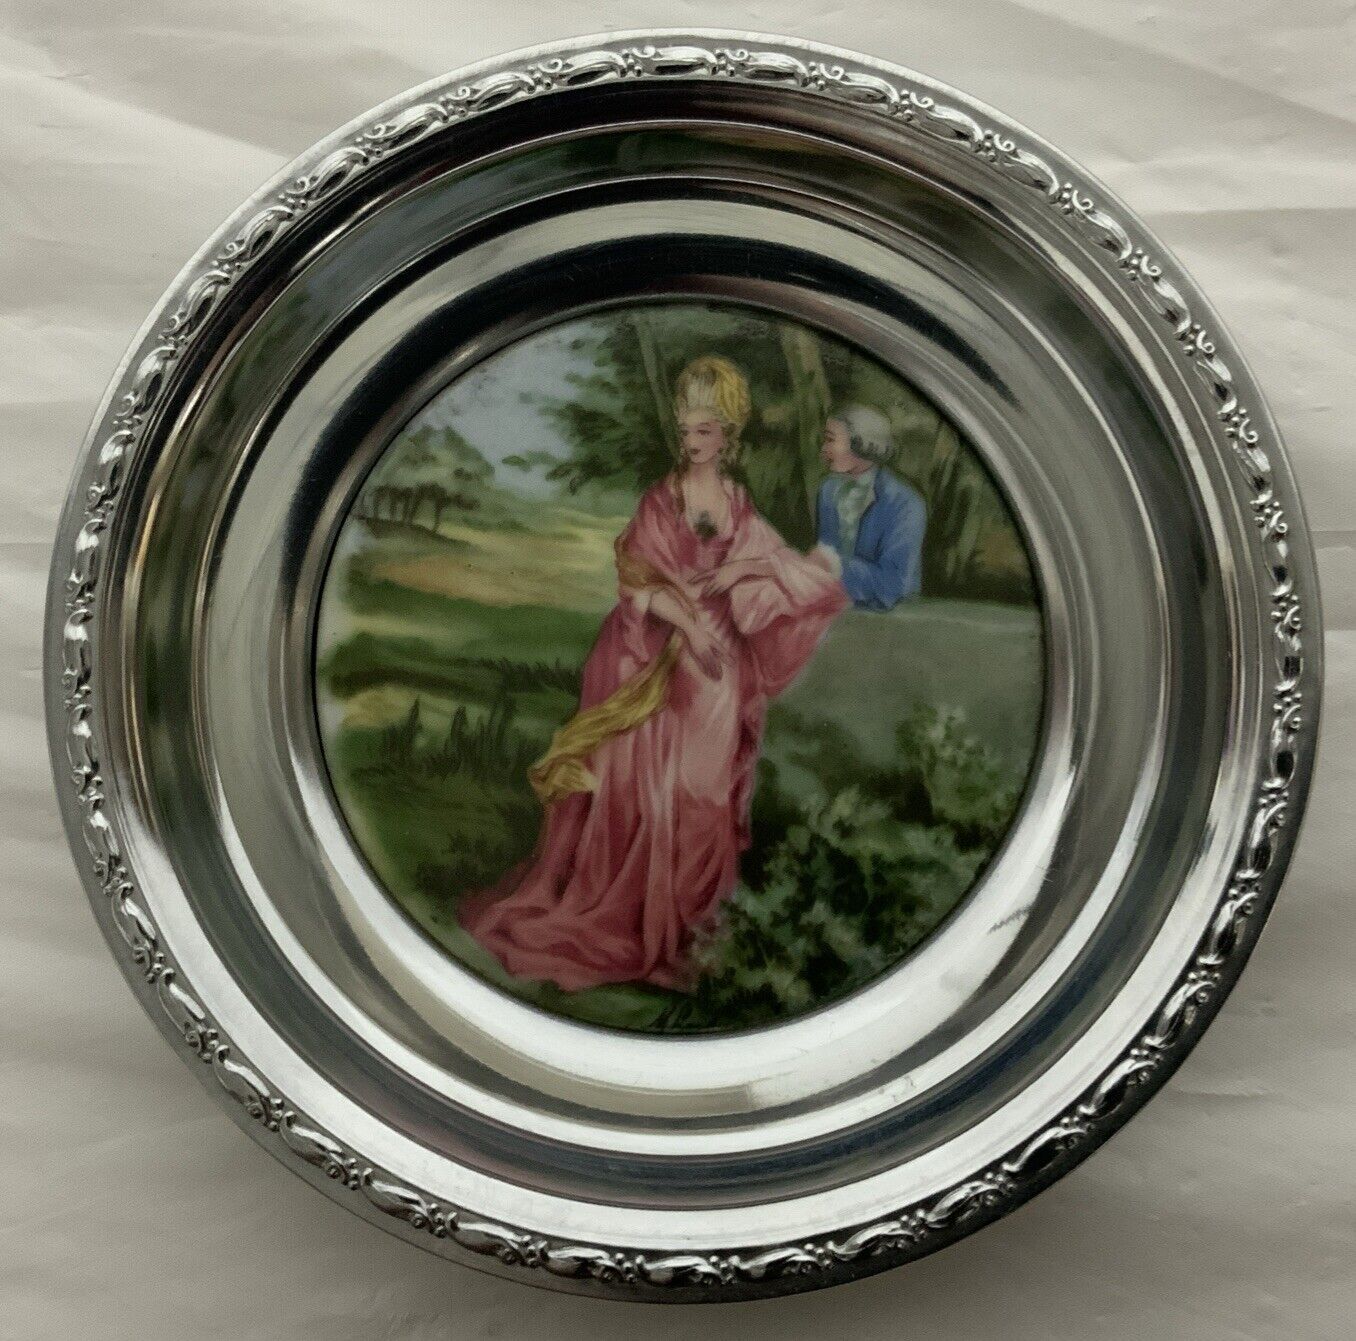 Vinage Porcelain & Silver Color “Courting Couple” Trinket Tray